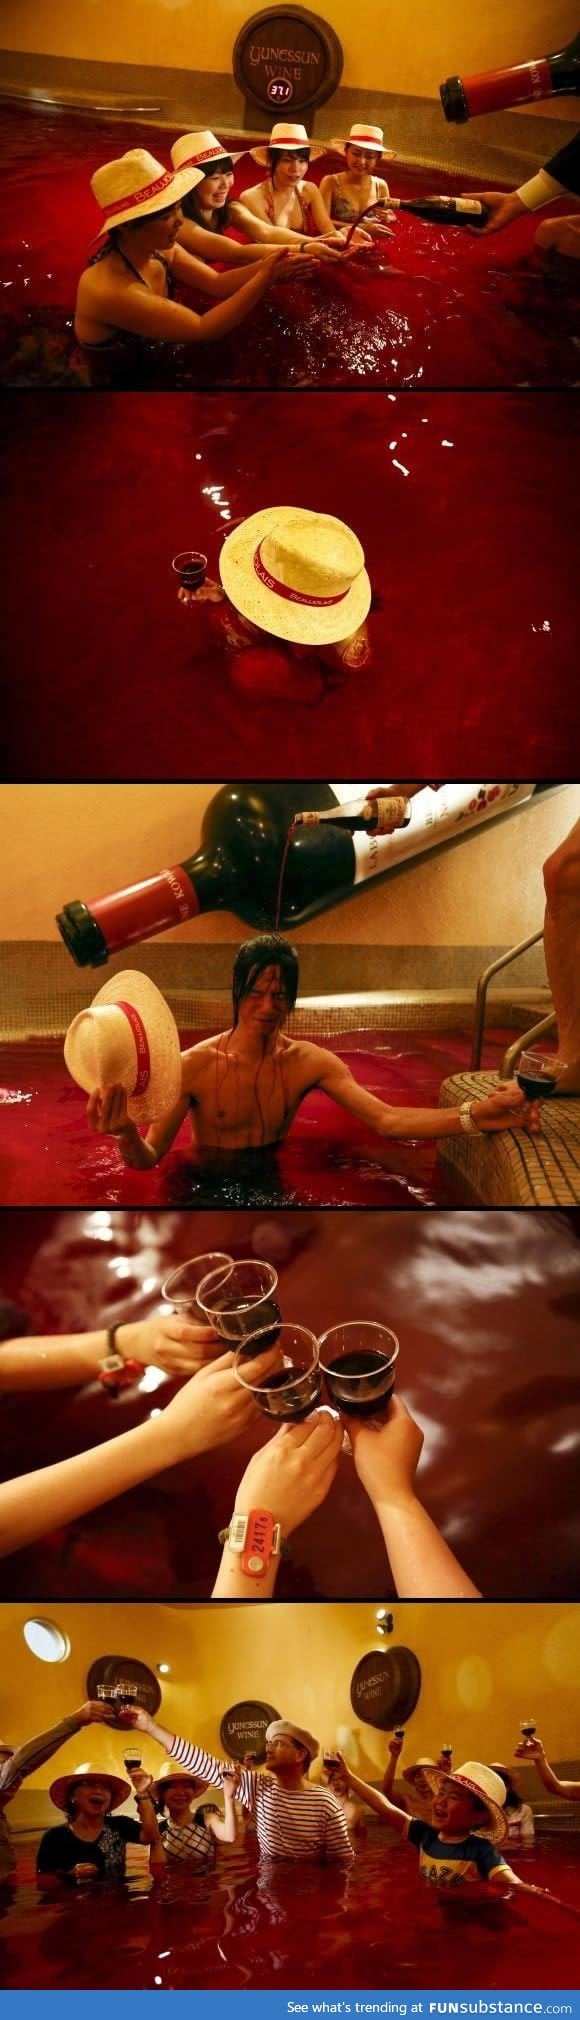 People in Japan celebrate a French holiday by bathing in a pool of wine